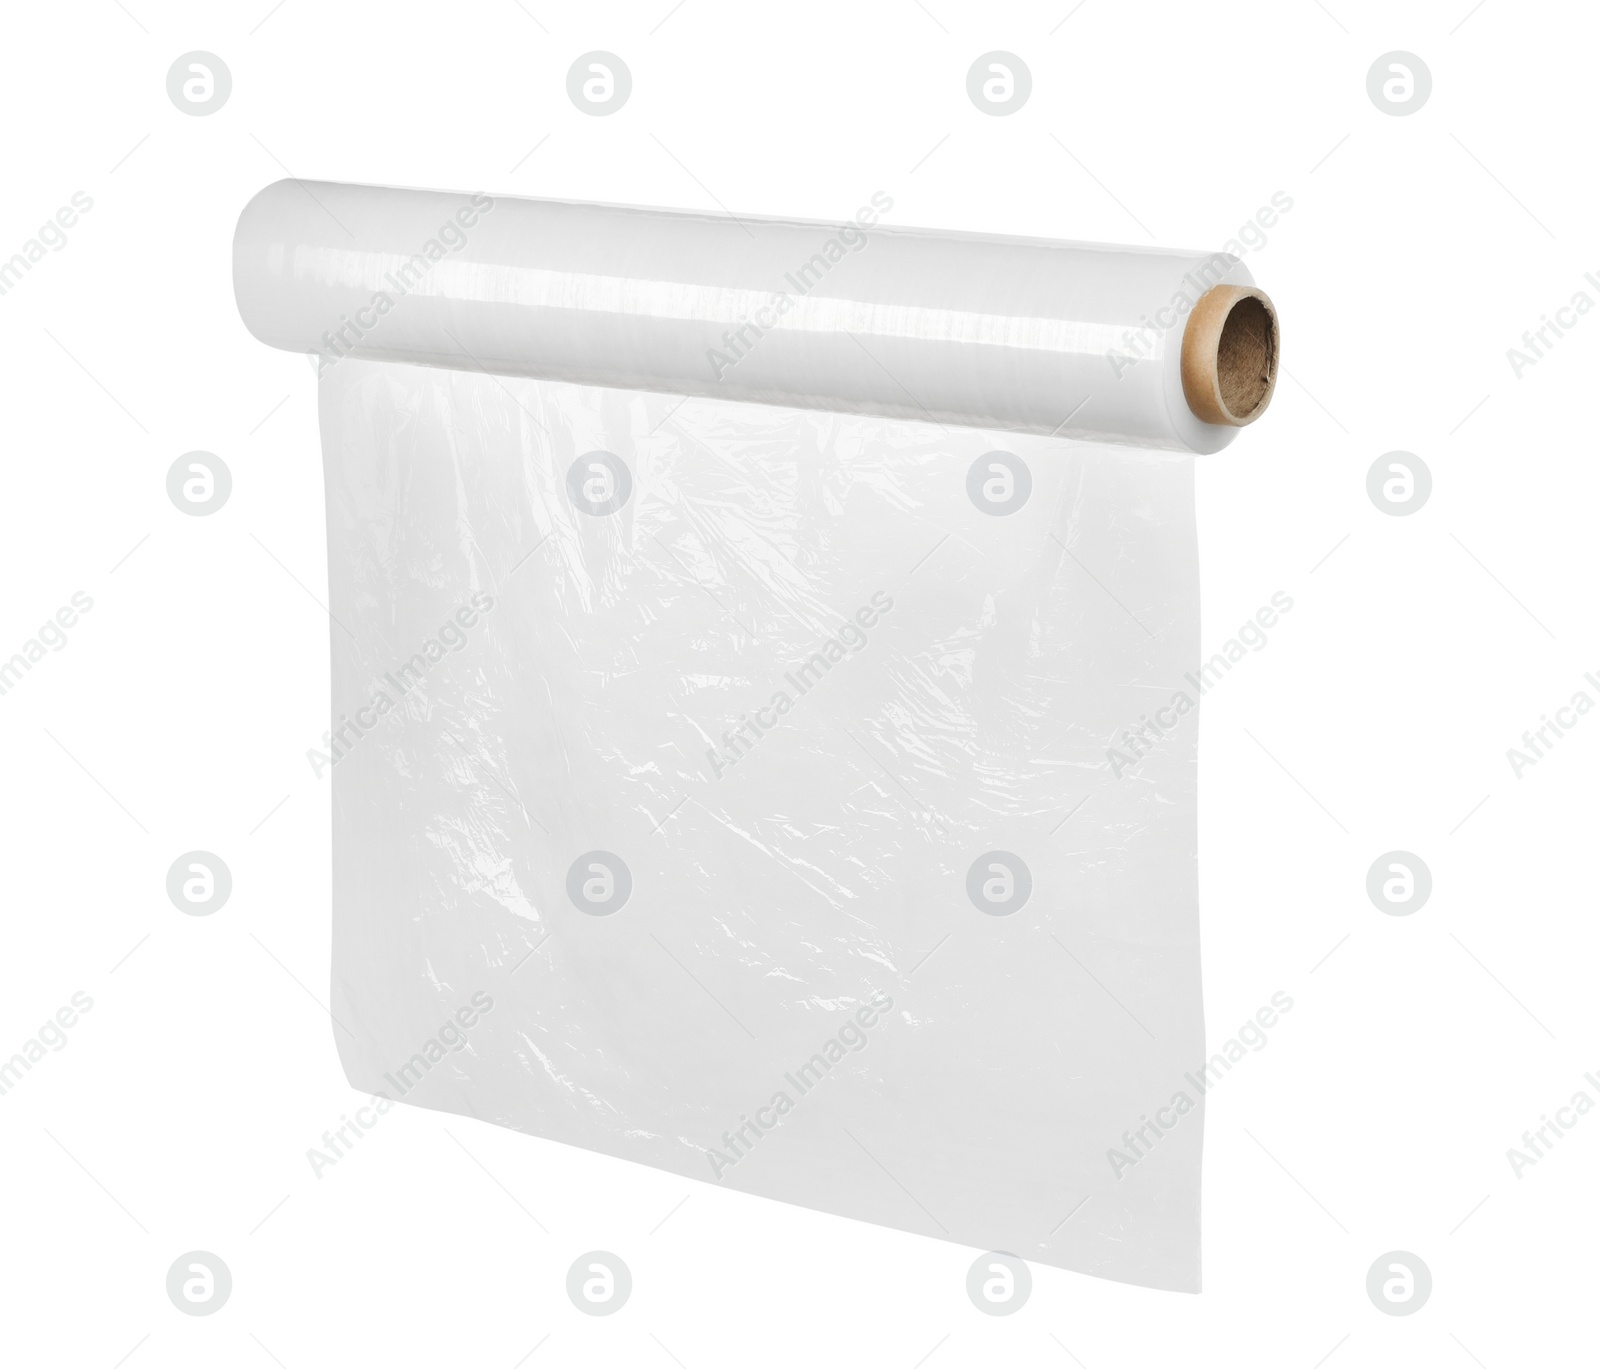 Photo of Roll of transparent stretch wrap isolated on white